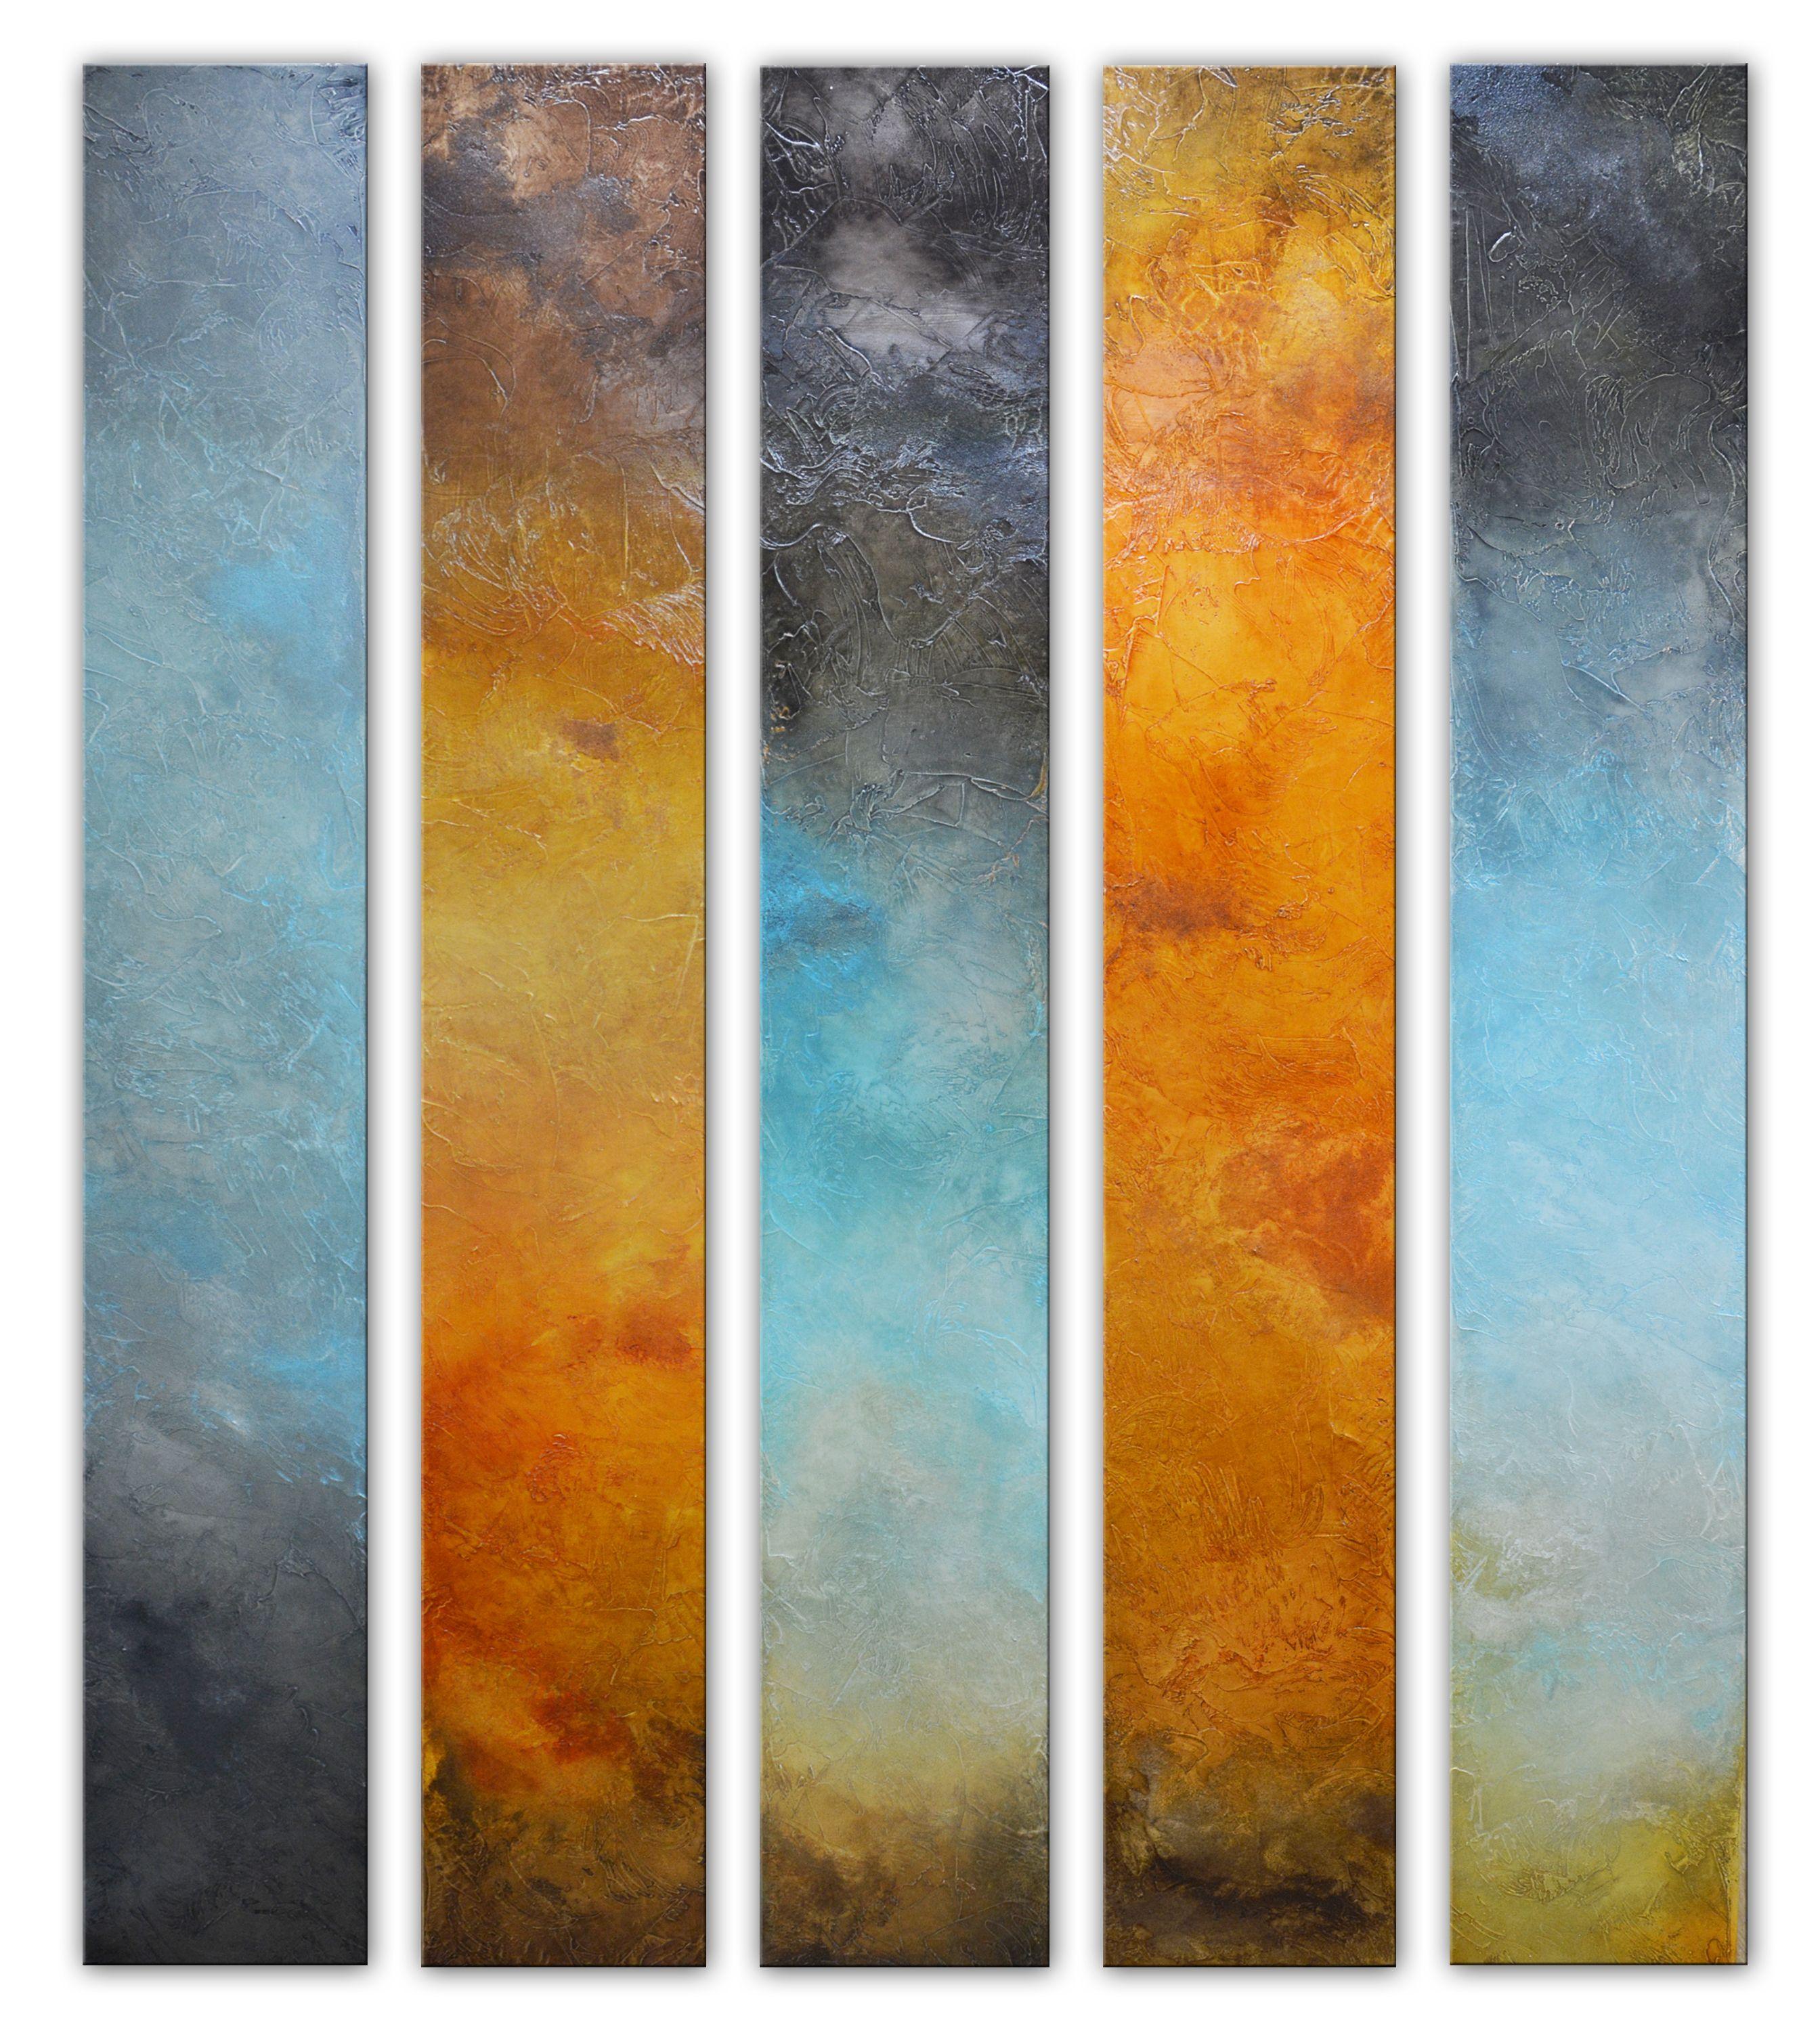   This 5 panels abstract original painting is a textural work on bold bright colors, with beautiful details and texture. Each panel has different and original knife strokes and tones. I really enjoy creating this kind of work and I love working on